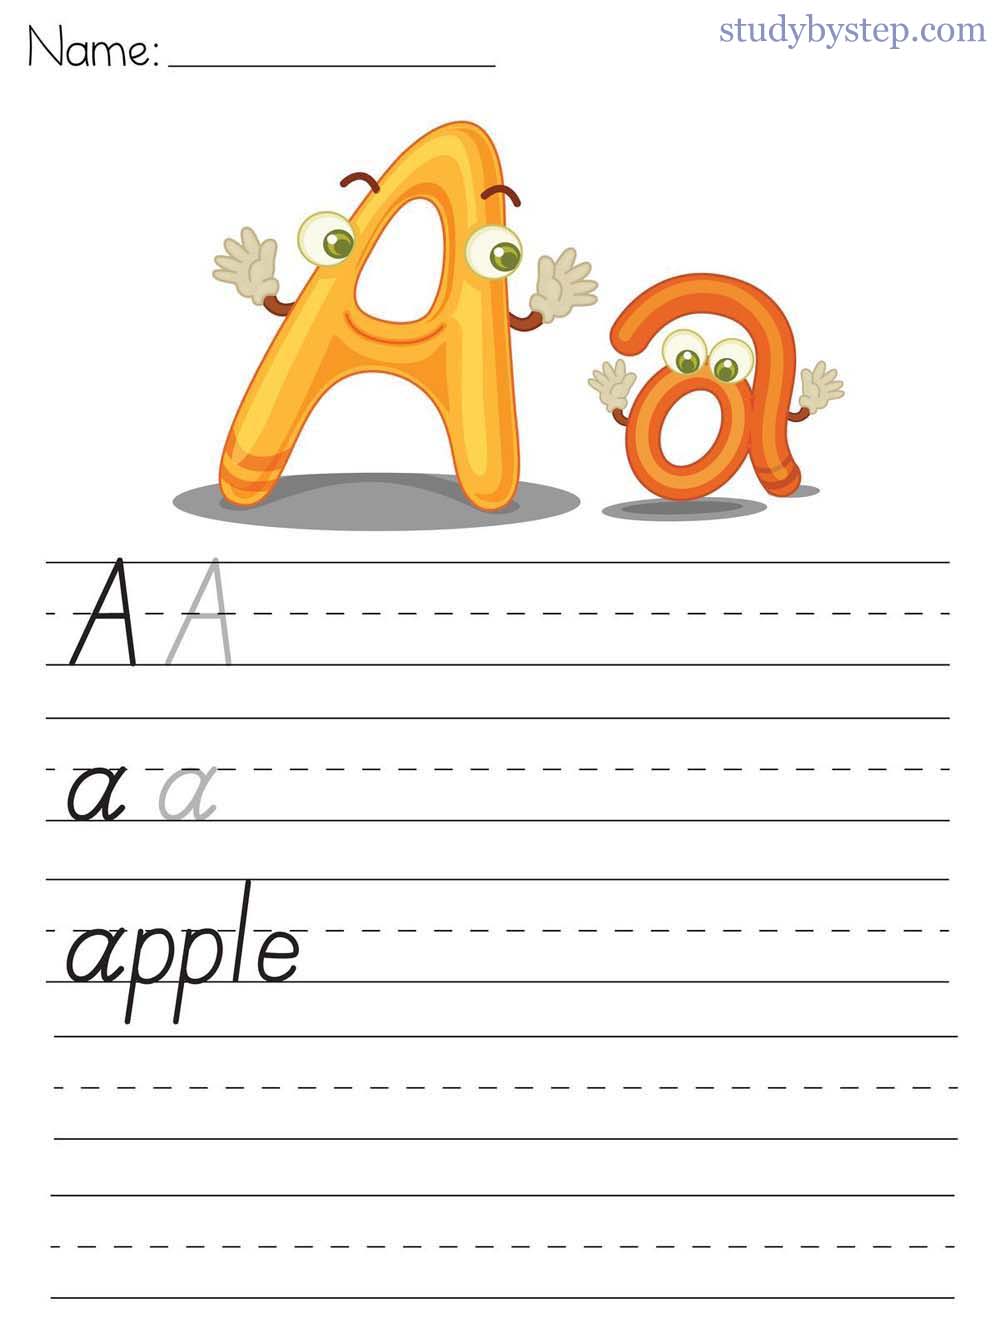 Picture Worksheet 4 - Handwriting Practice of Capital A and Small a